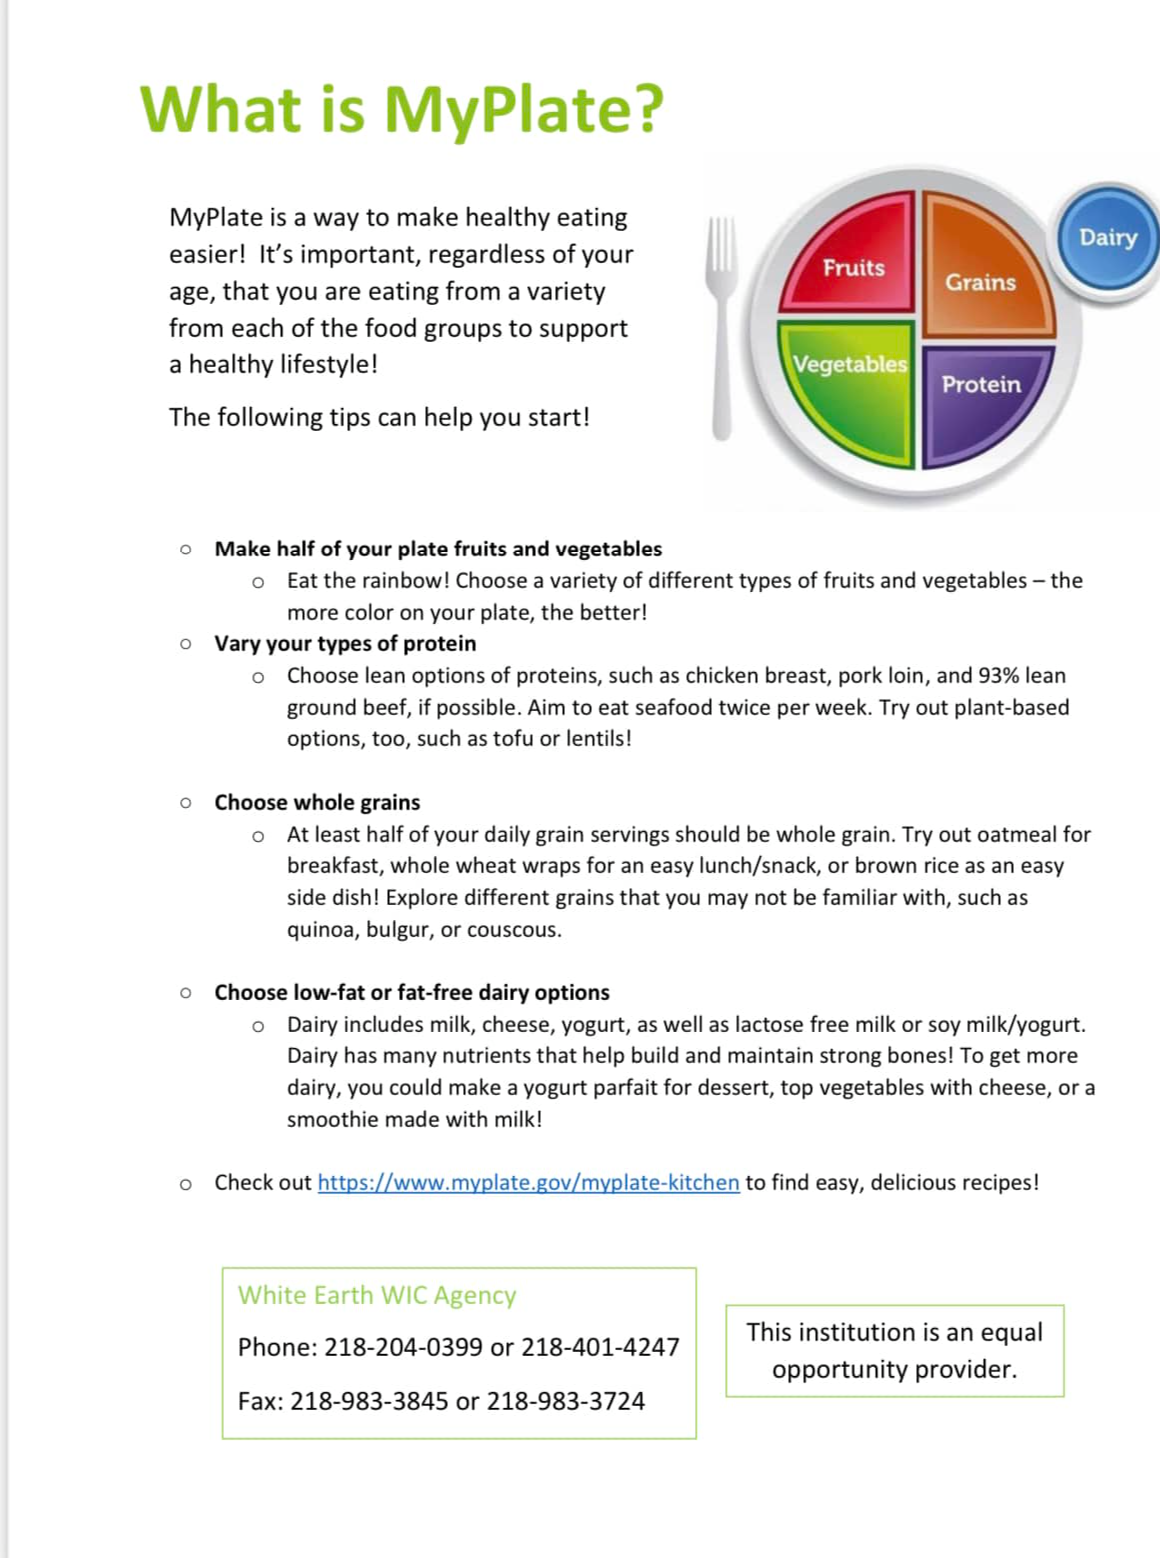 What is MyPlate?